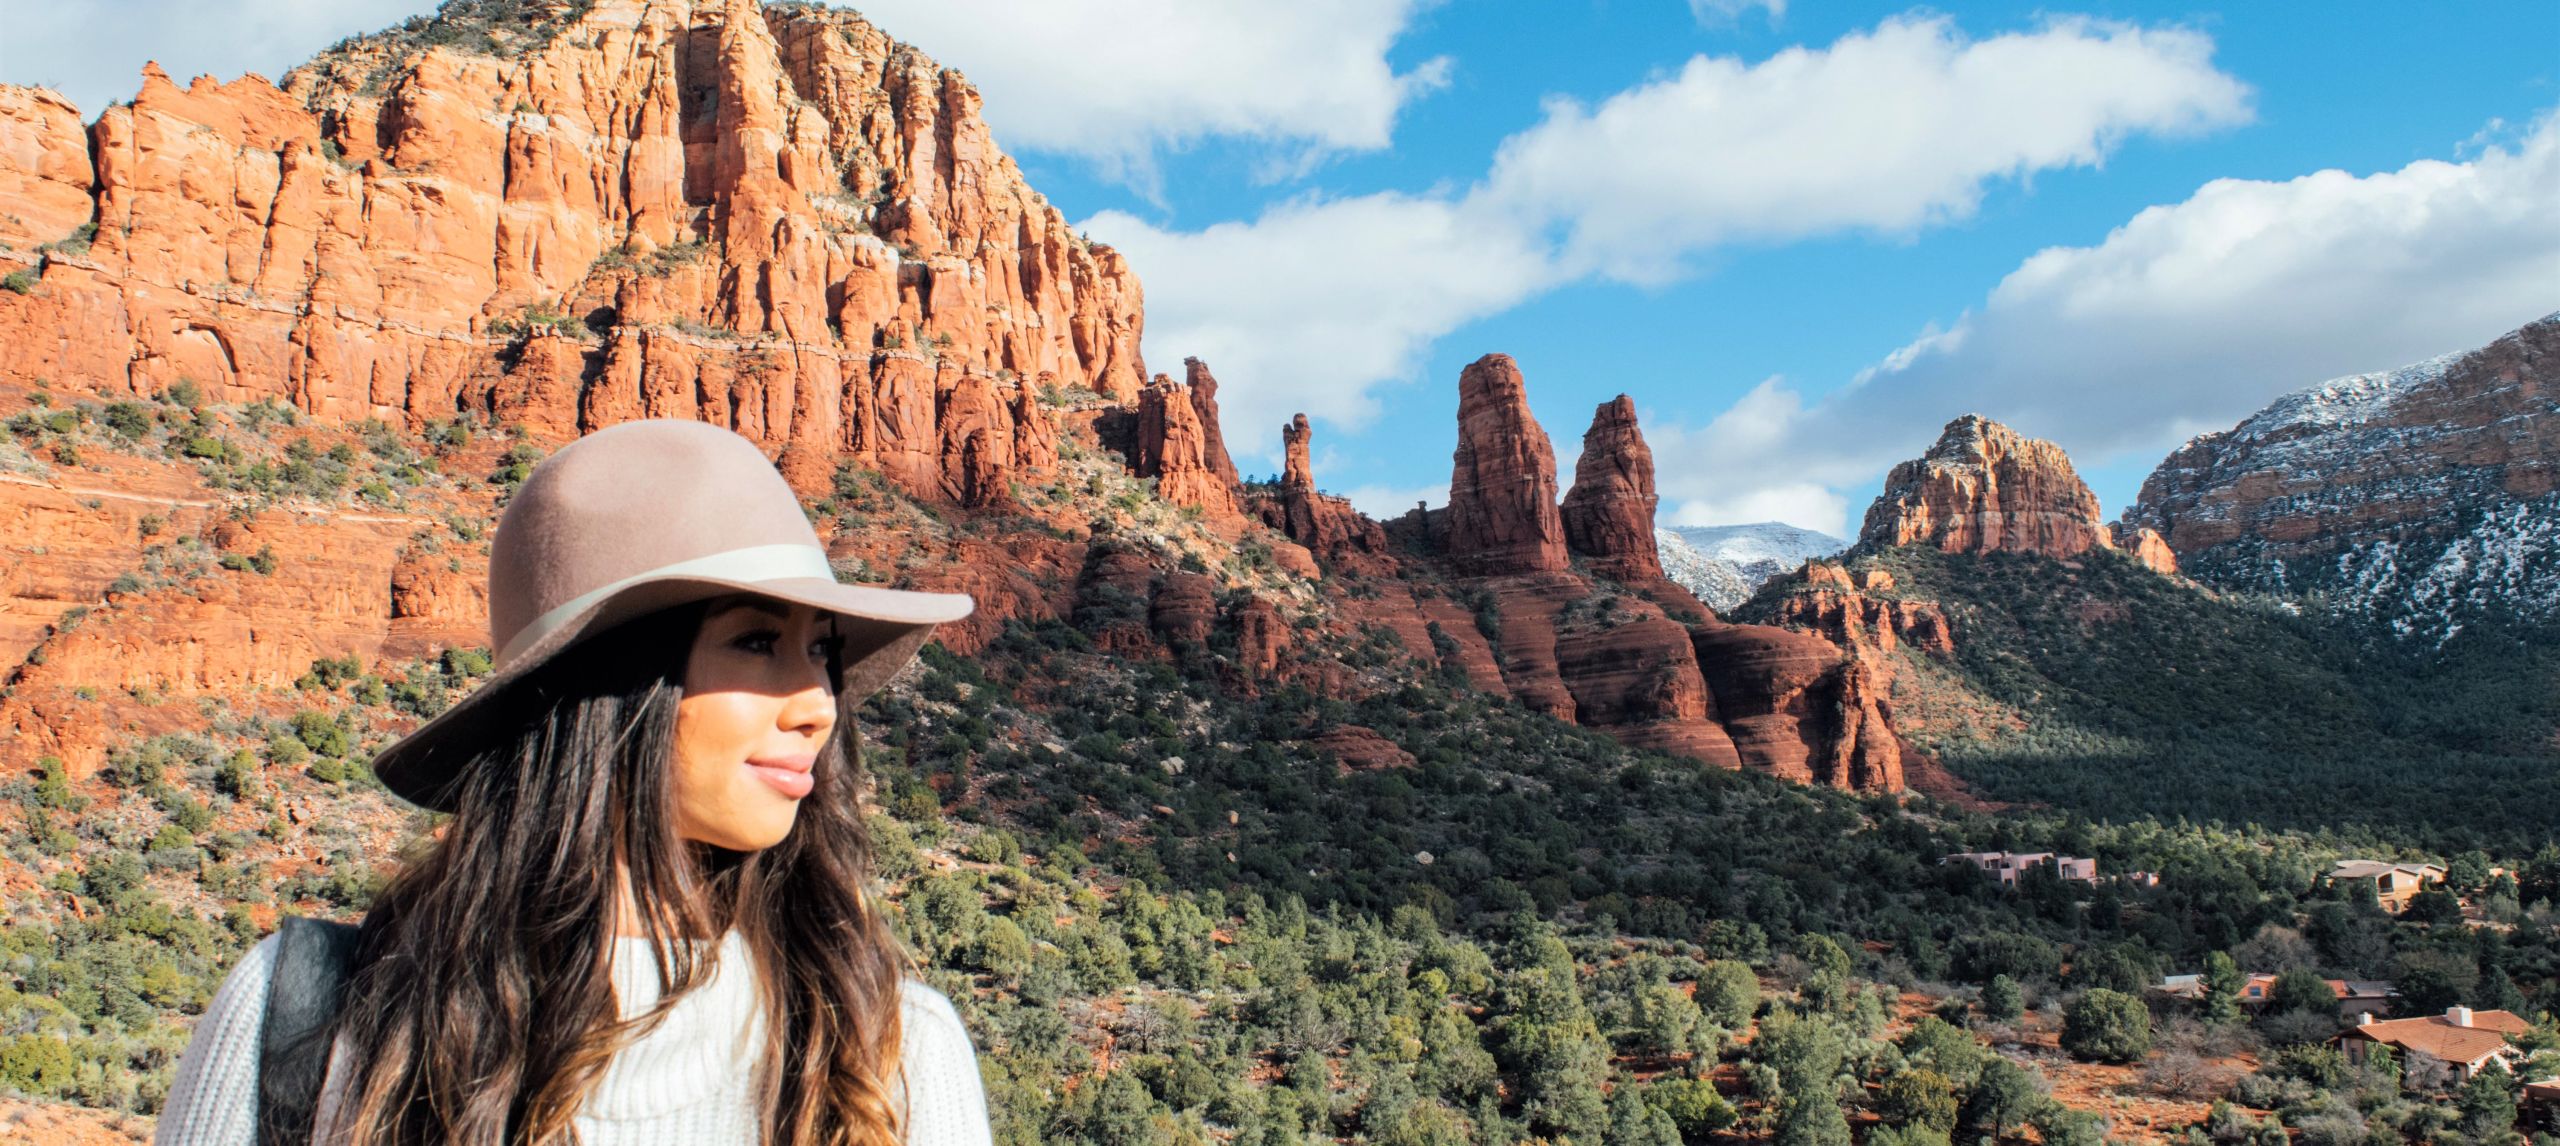 Woman with red rocks mountain landscape behind her